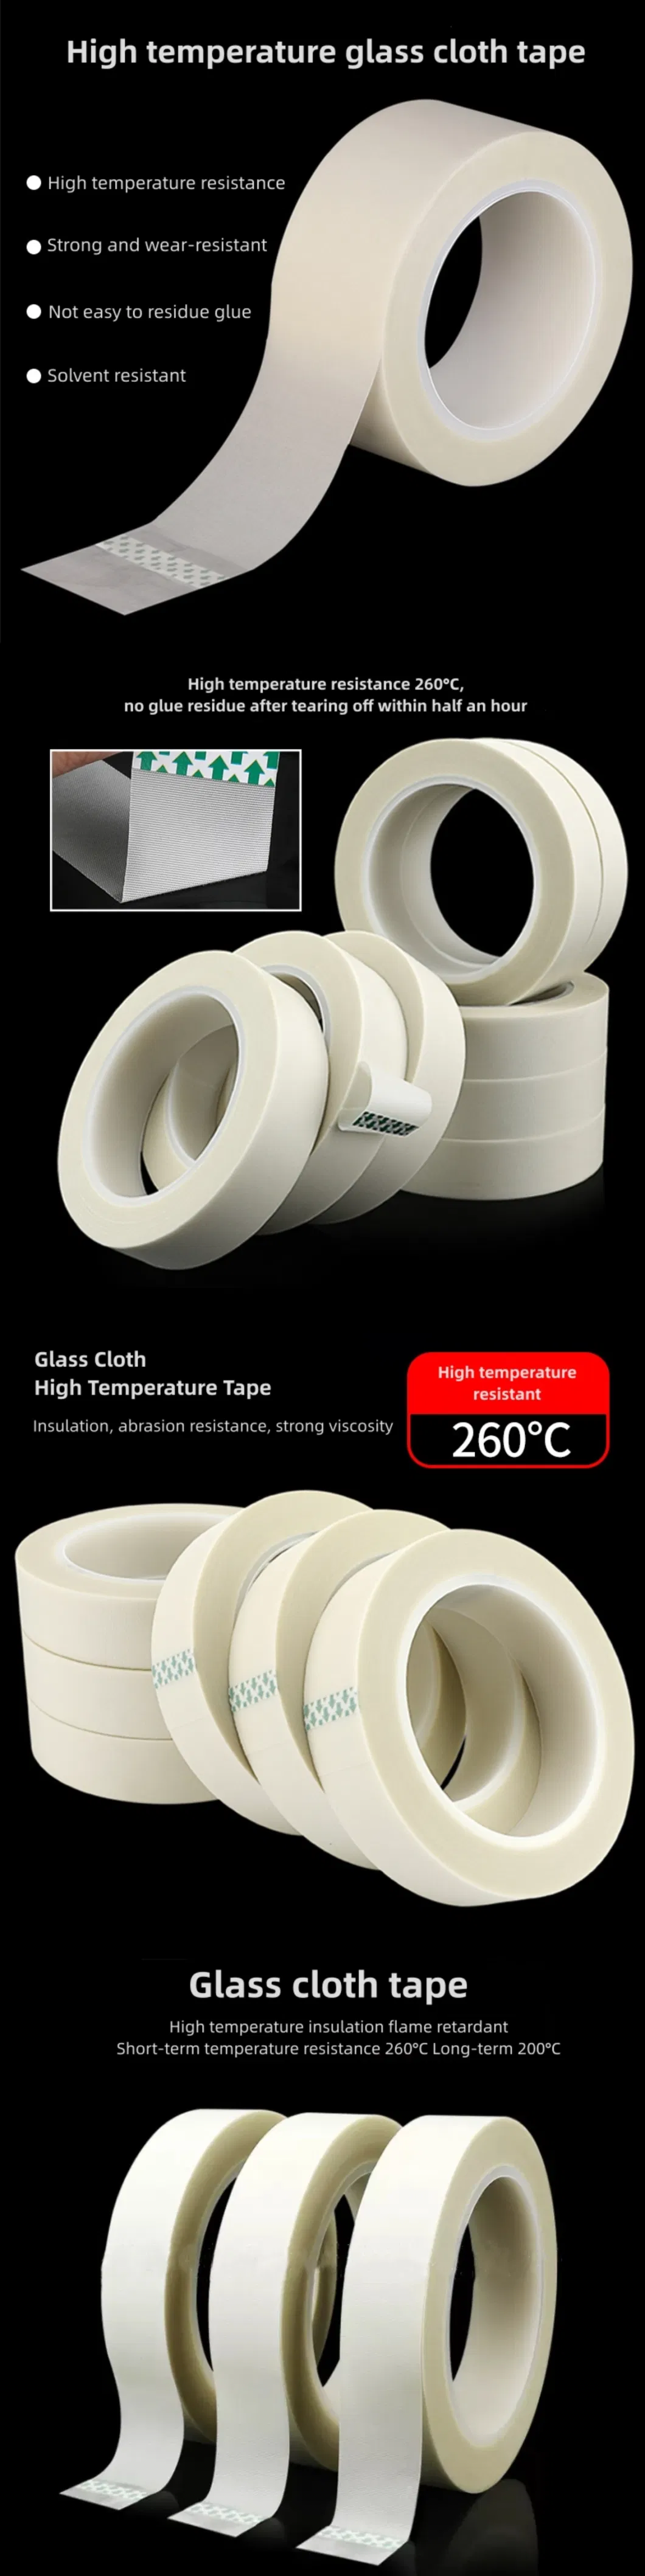 High Tensile Strength Adhesive Cross-Weaved Fiber Glass Reinforced Filament Packing Tape